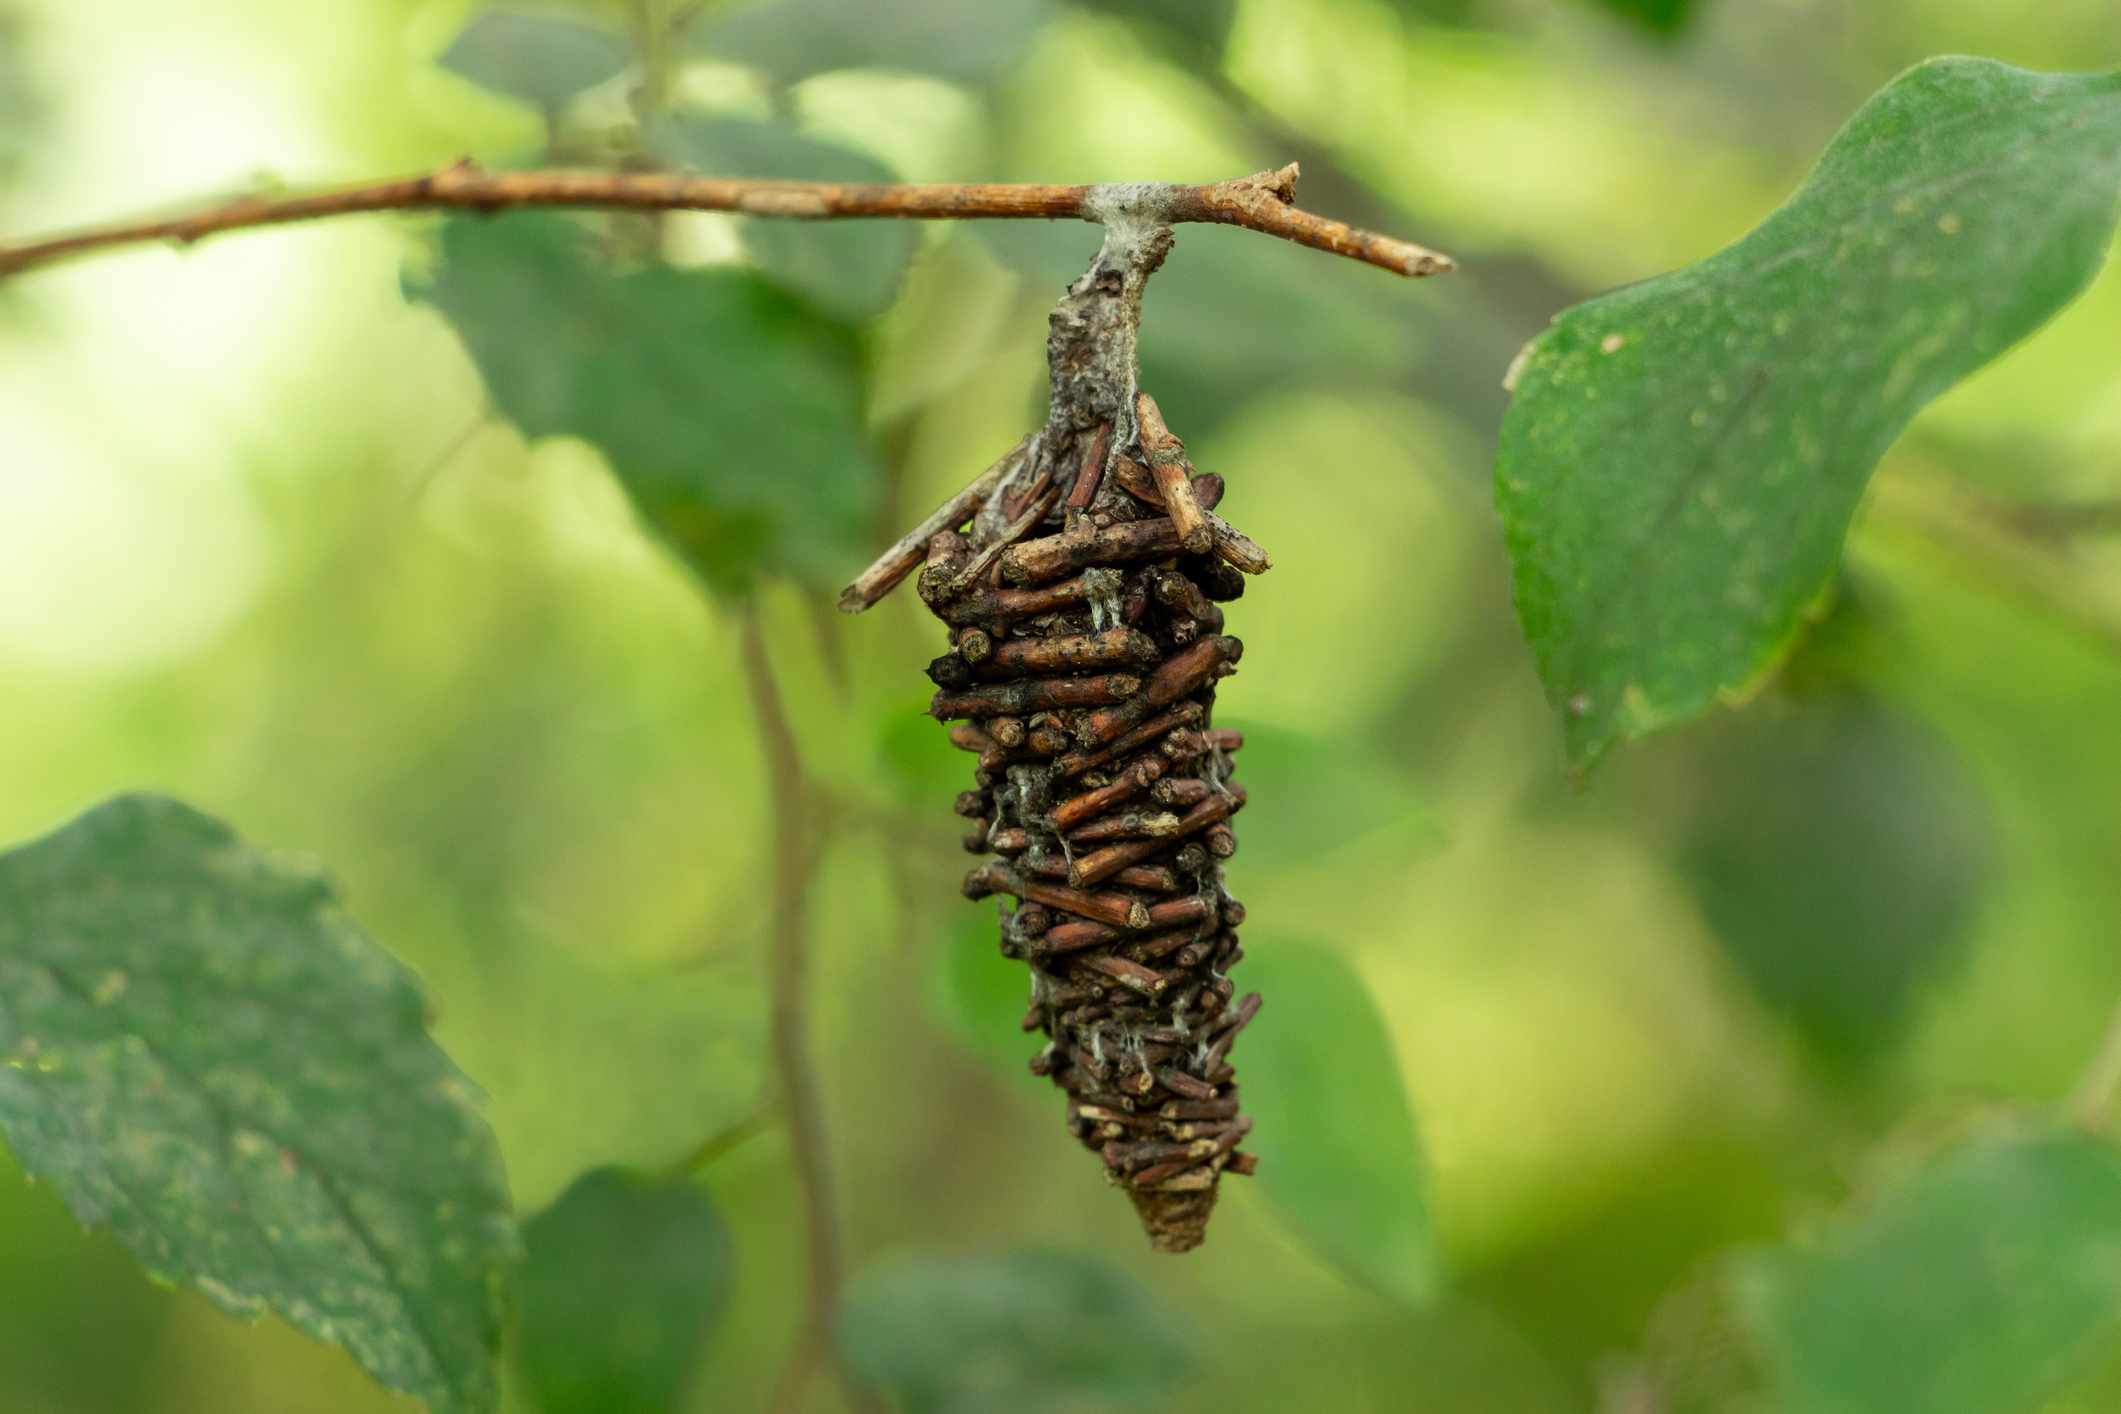 https://www.happysprout.com/wp-content/uploads/sites/4/2022/04/bagworm-on-a-branch.jpg?fit=2121%2C1414&p=1